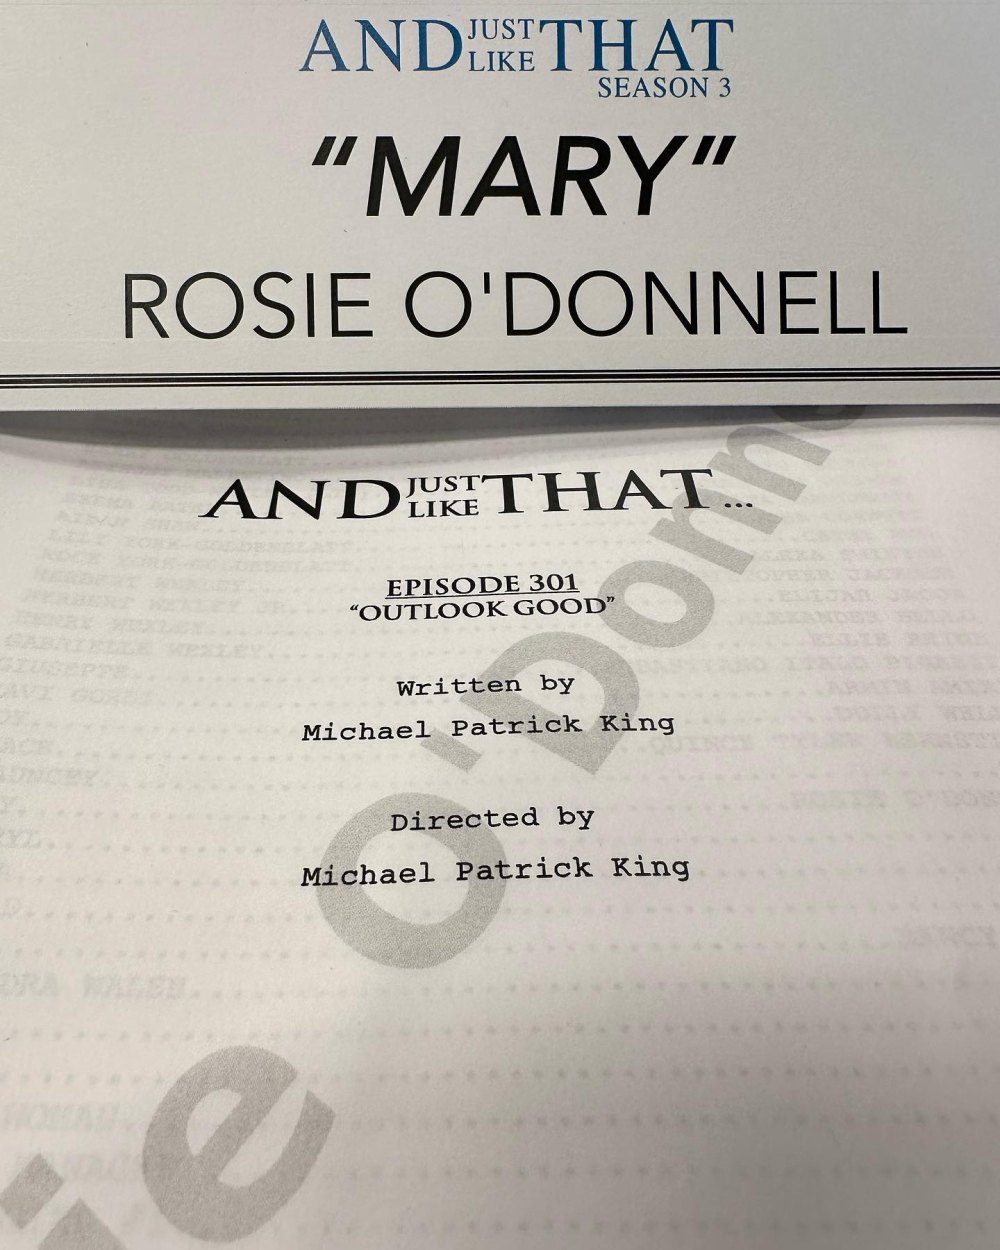 Rosie O Donnell is there and just like that for season 3 of “Here Comes Mary.”